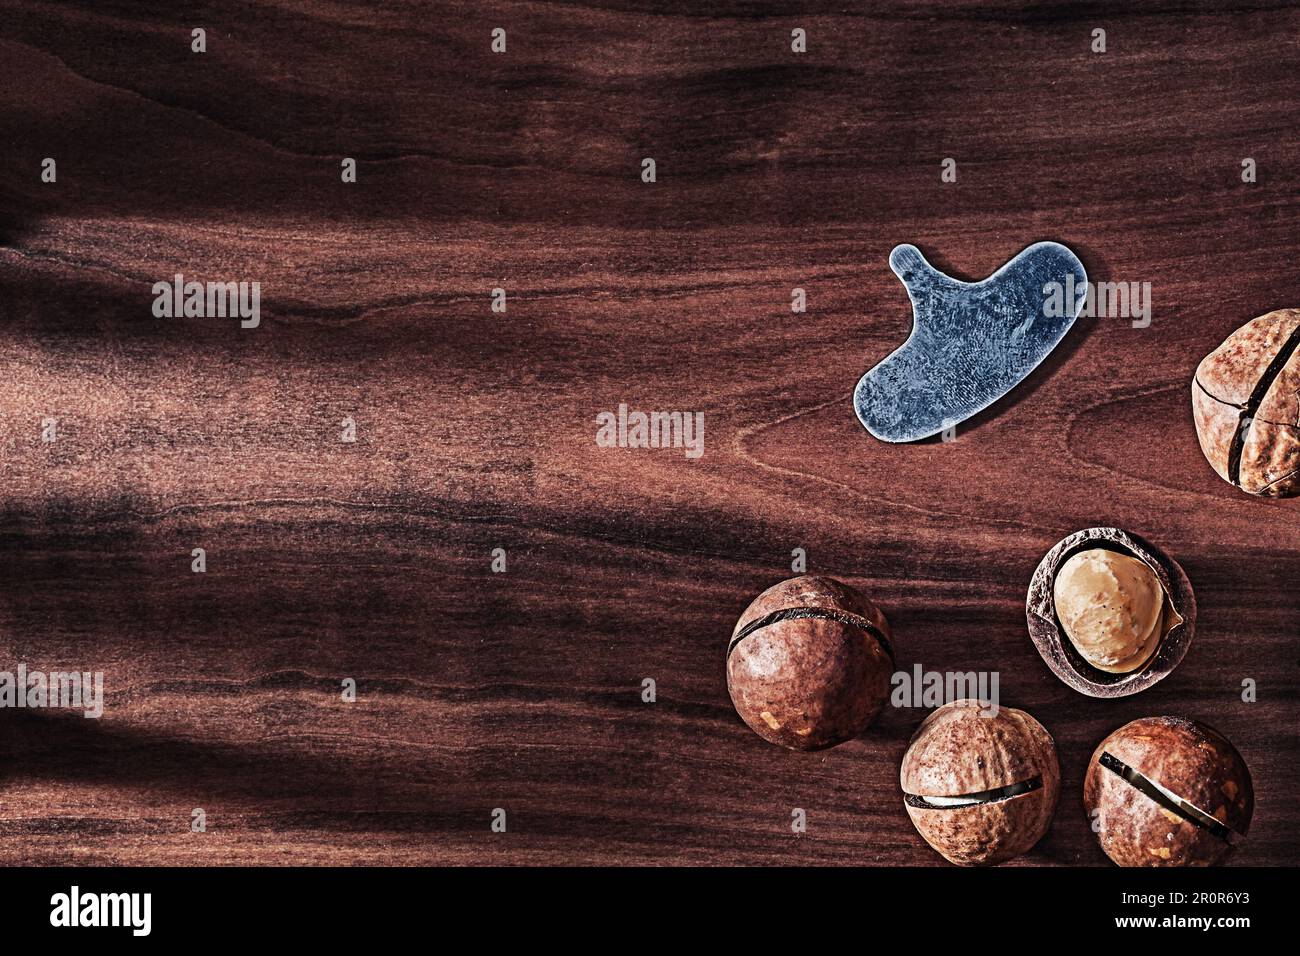 Nuts Of Macadamia On Vintage Wood With Copy Space Stock Photo